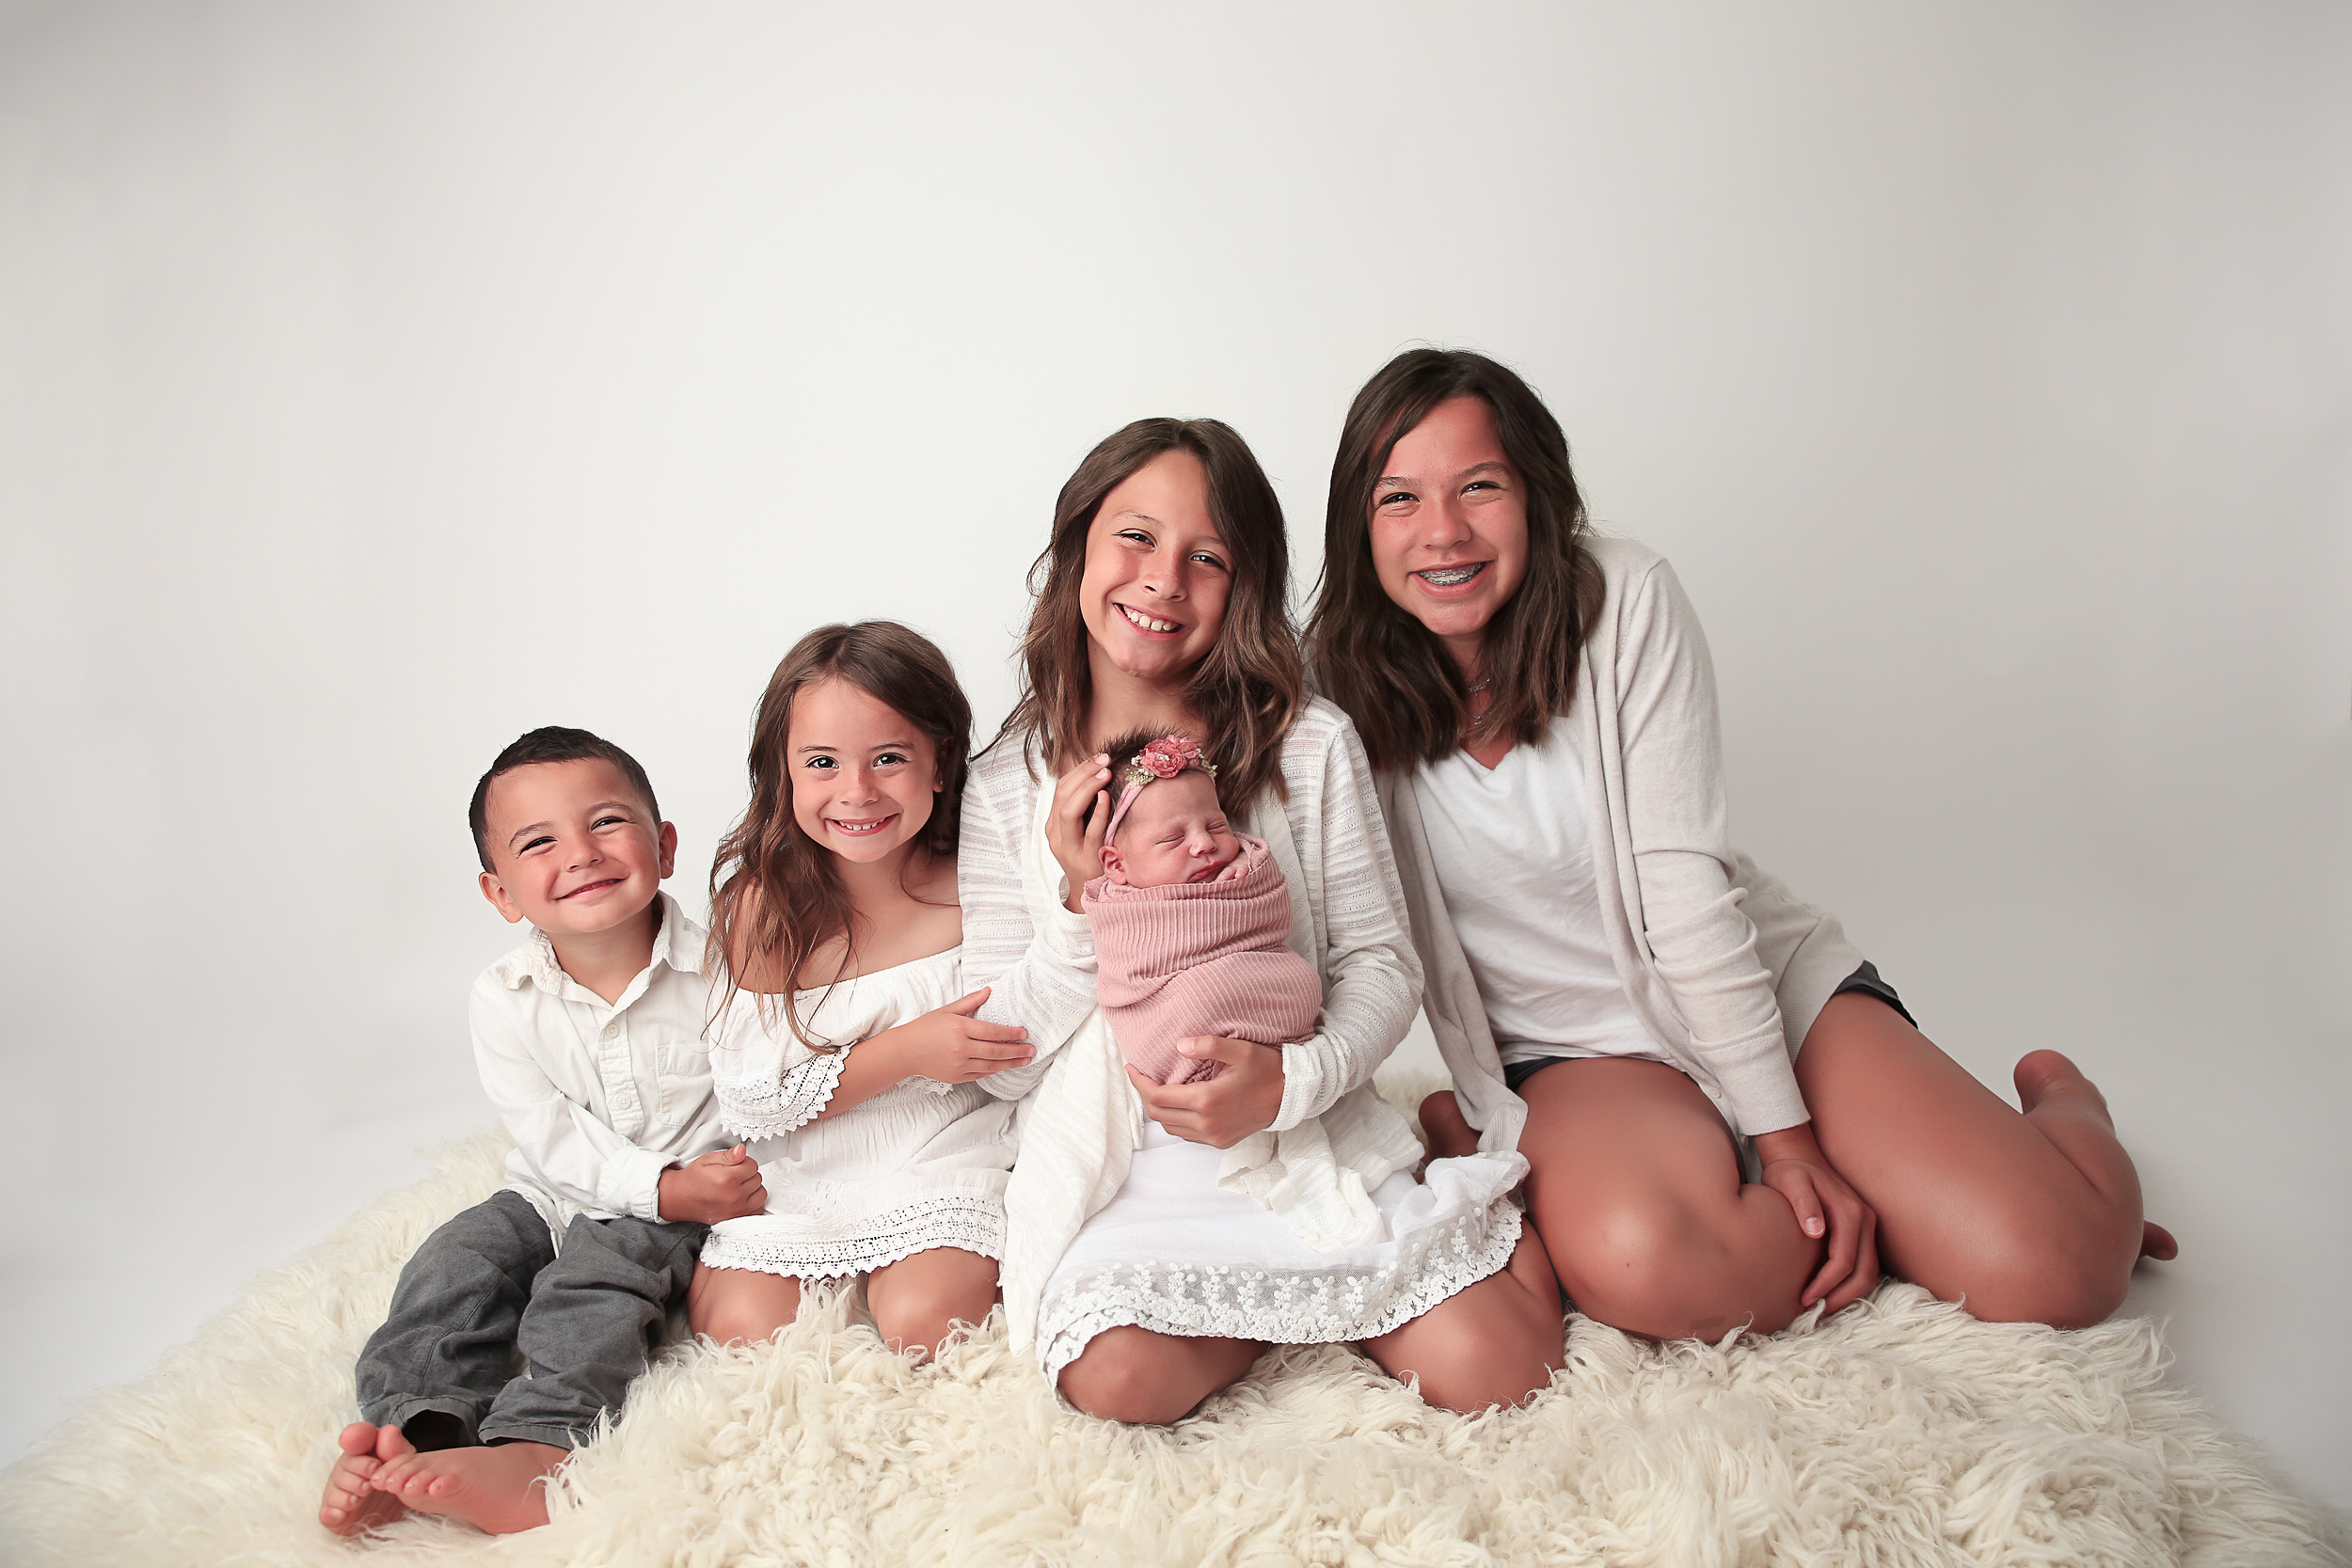 4 Siblings all sitting on a rug holding their baby sister that is wrapped in pink.